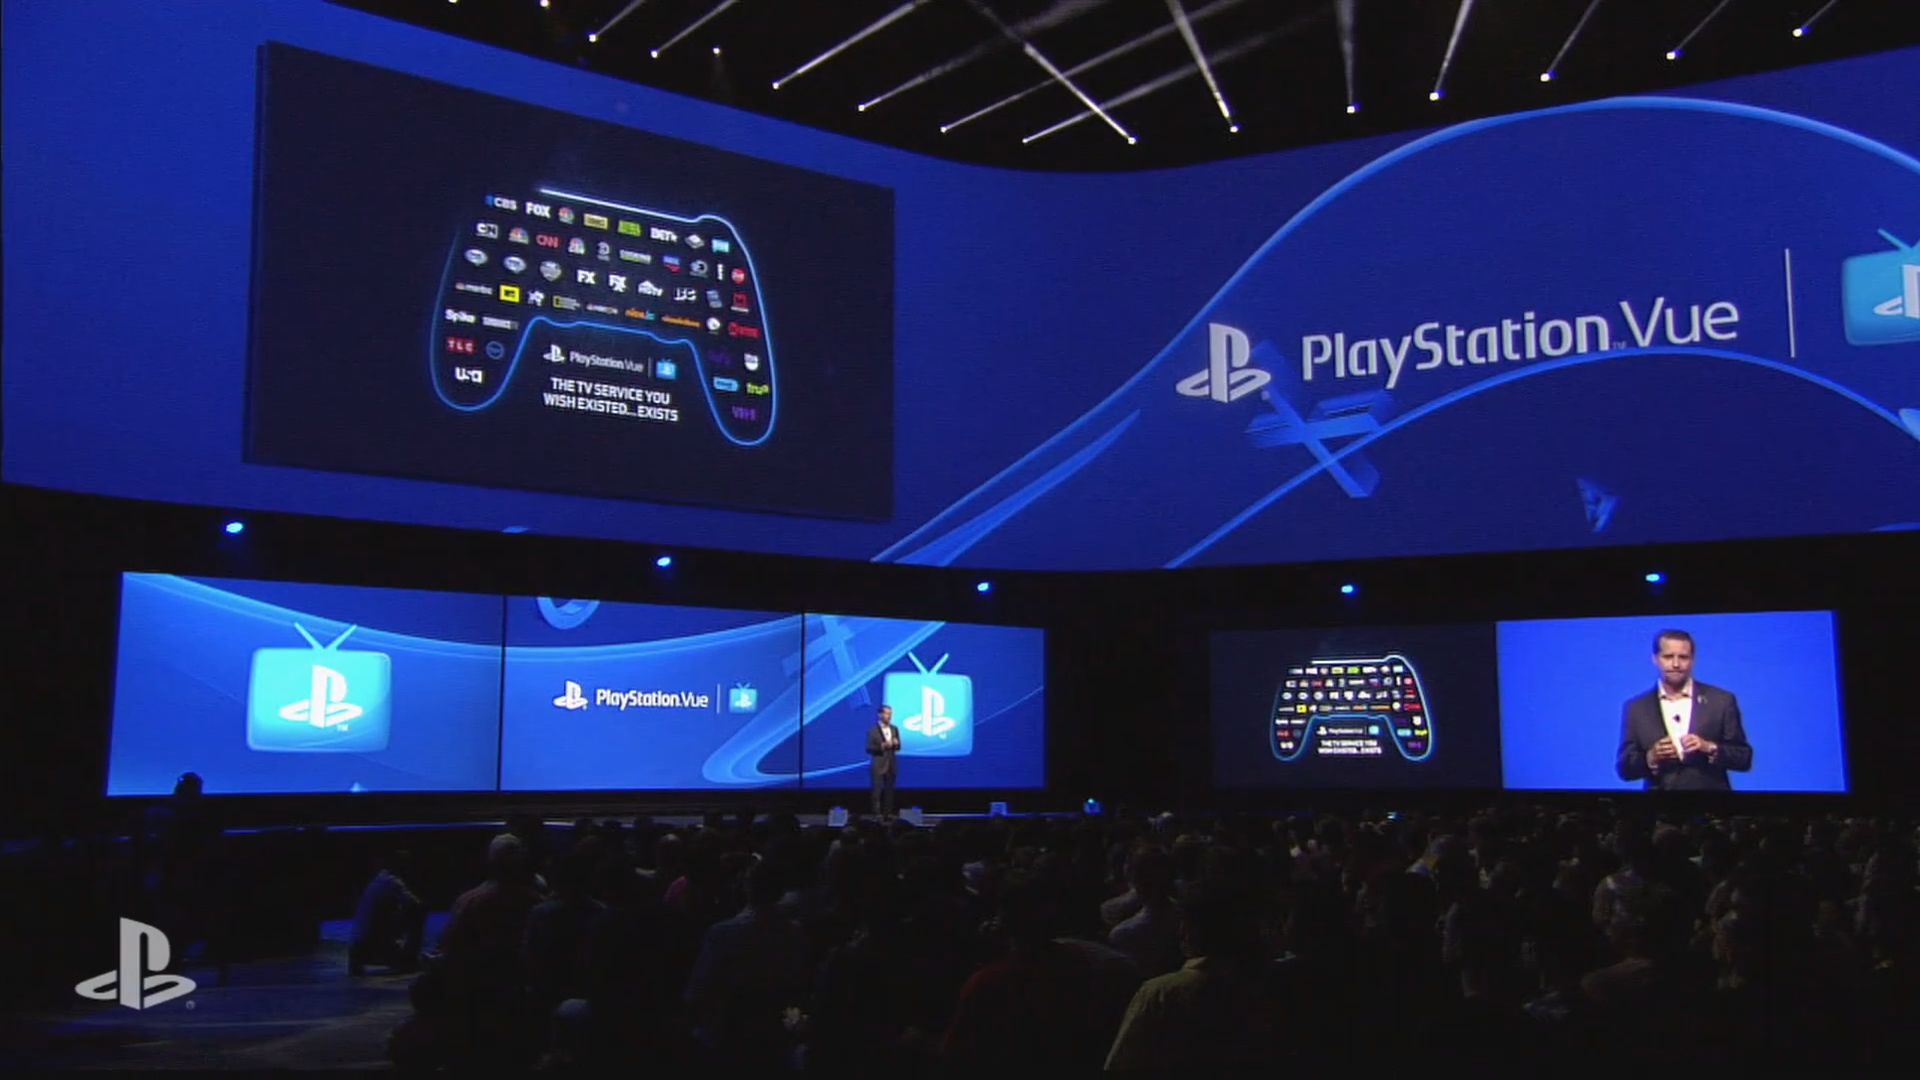 PlayStation Vue Reveal